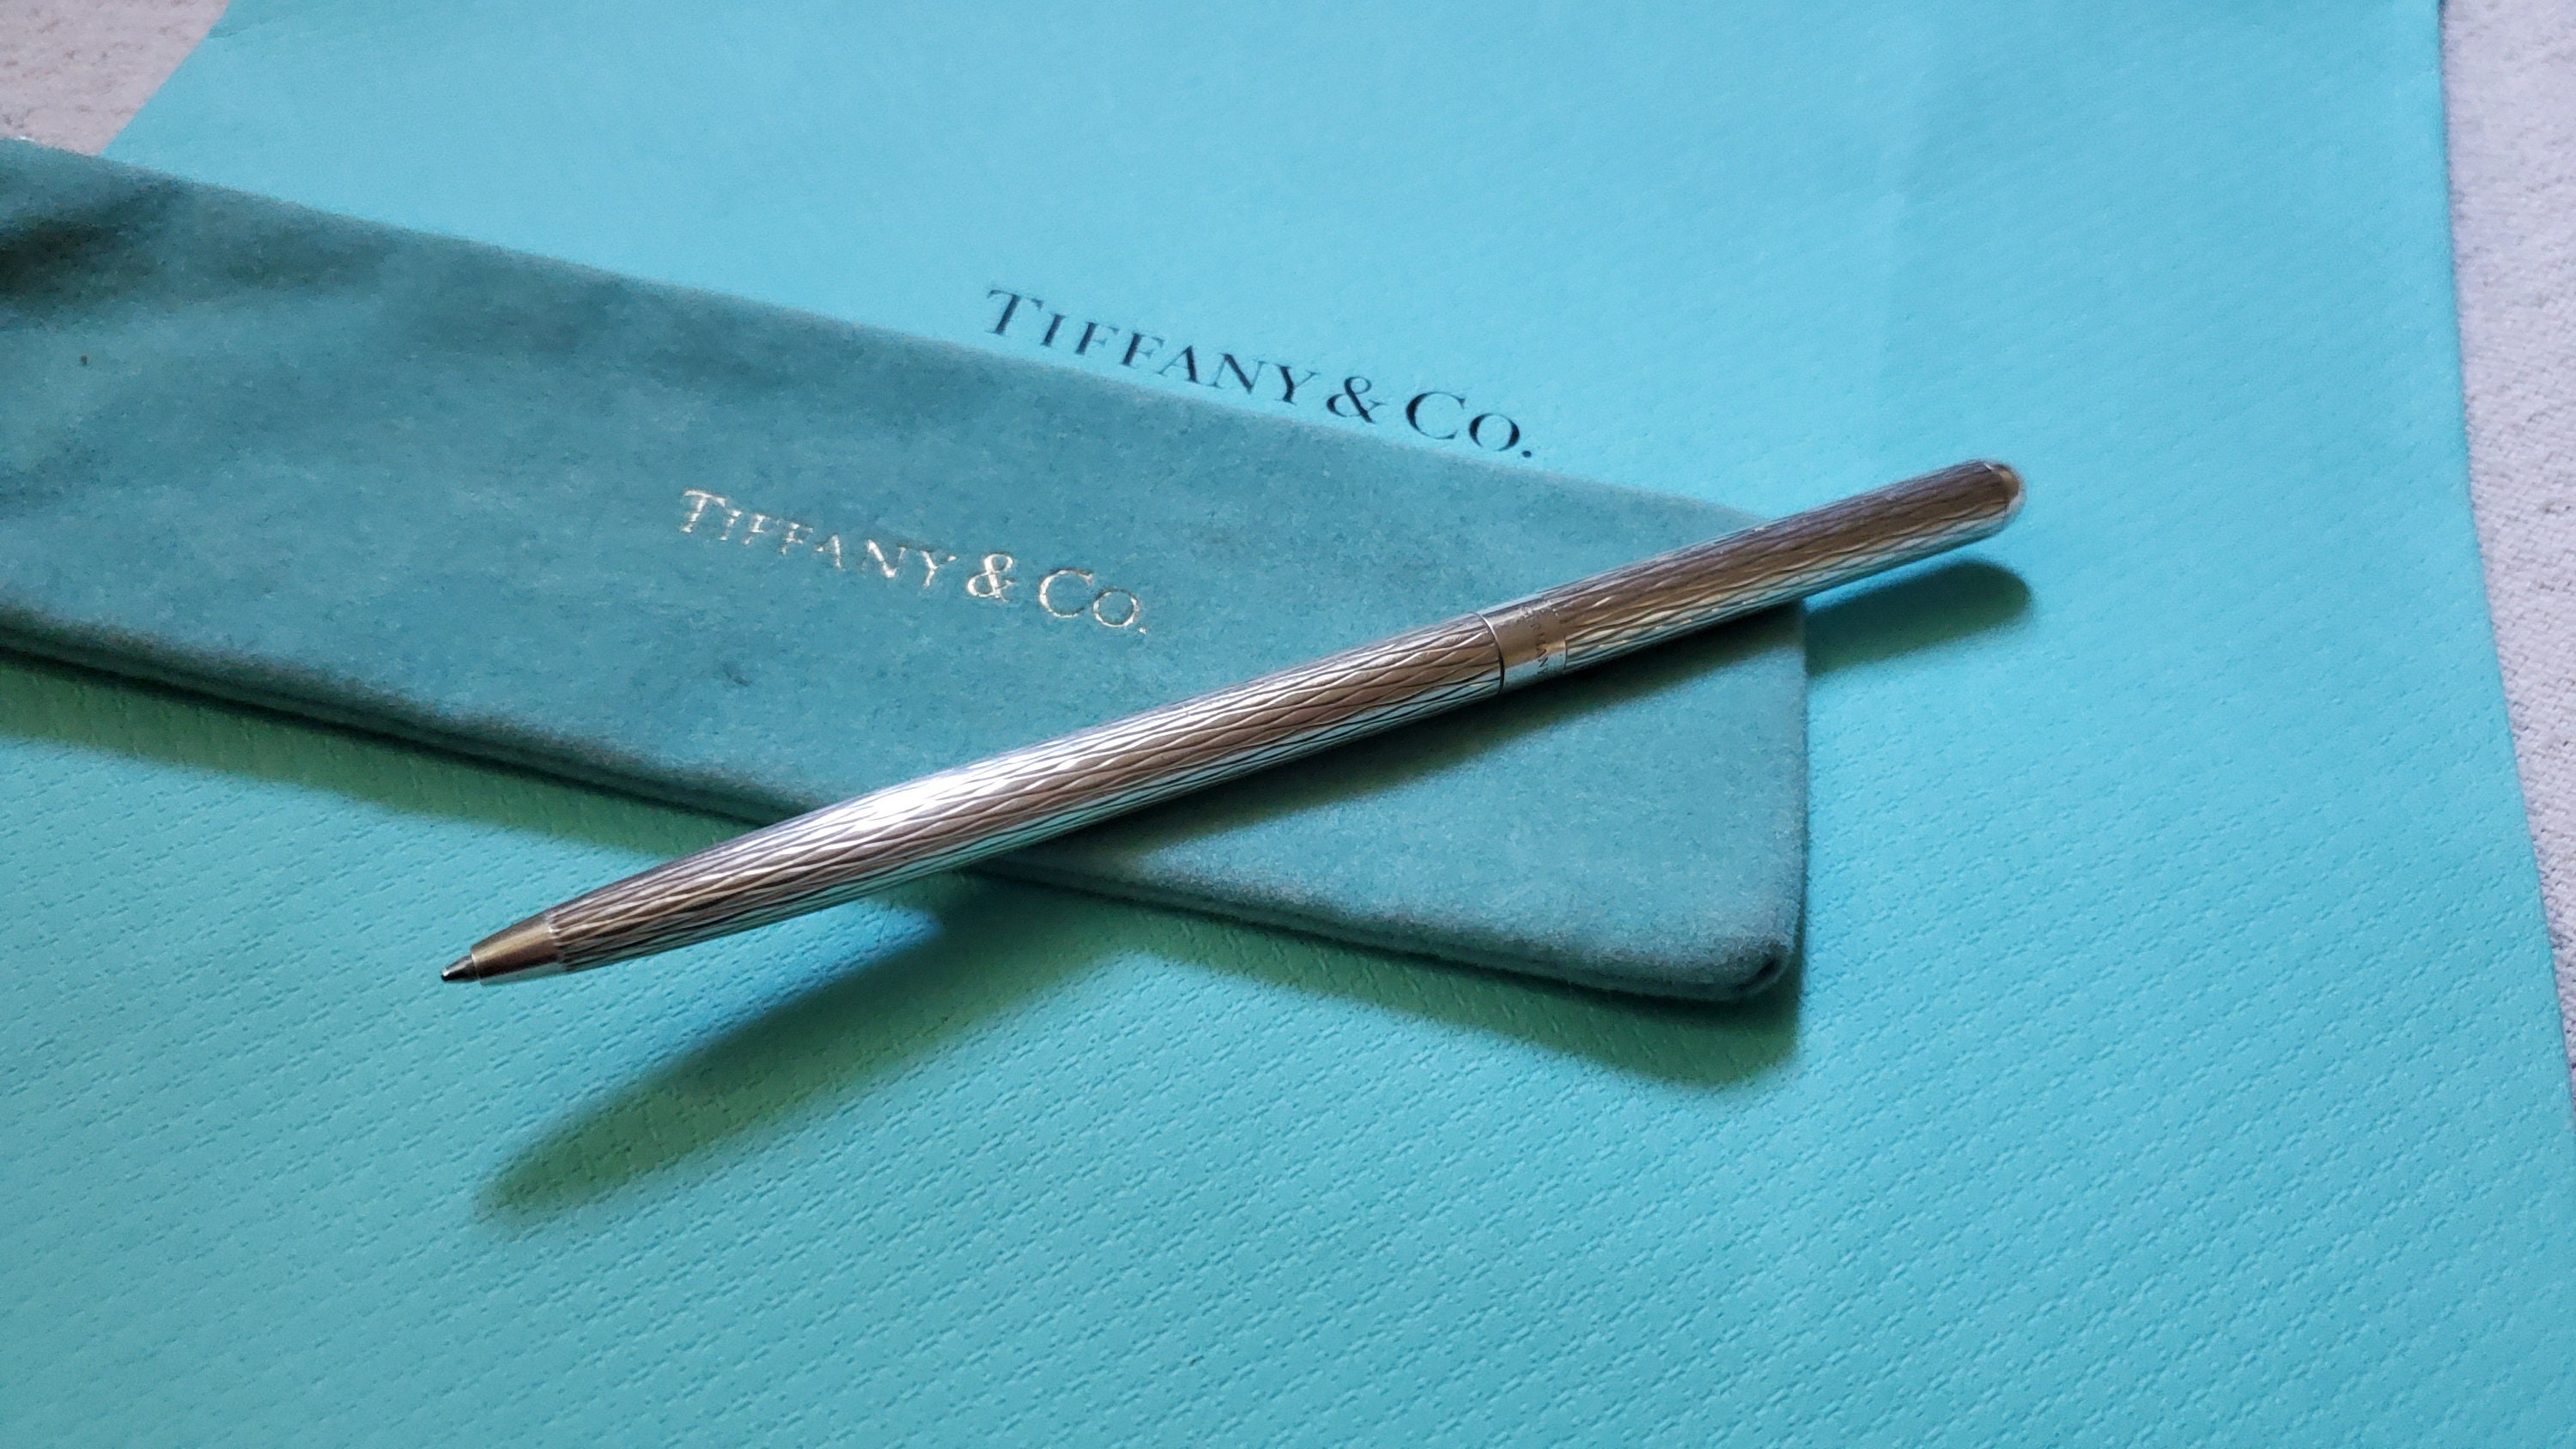 Tiffany & Co. Sterling Silver Roller Ball Pen Review - BLAKE'S